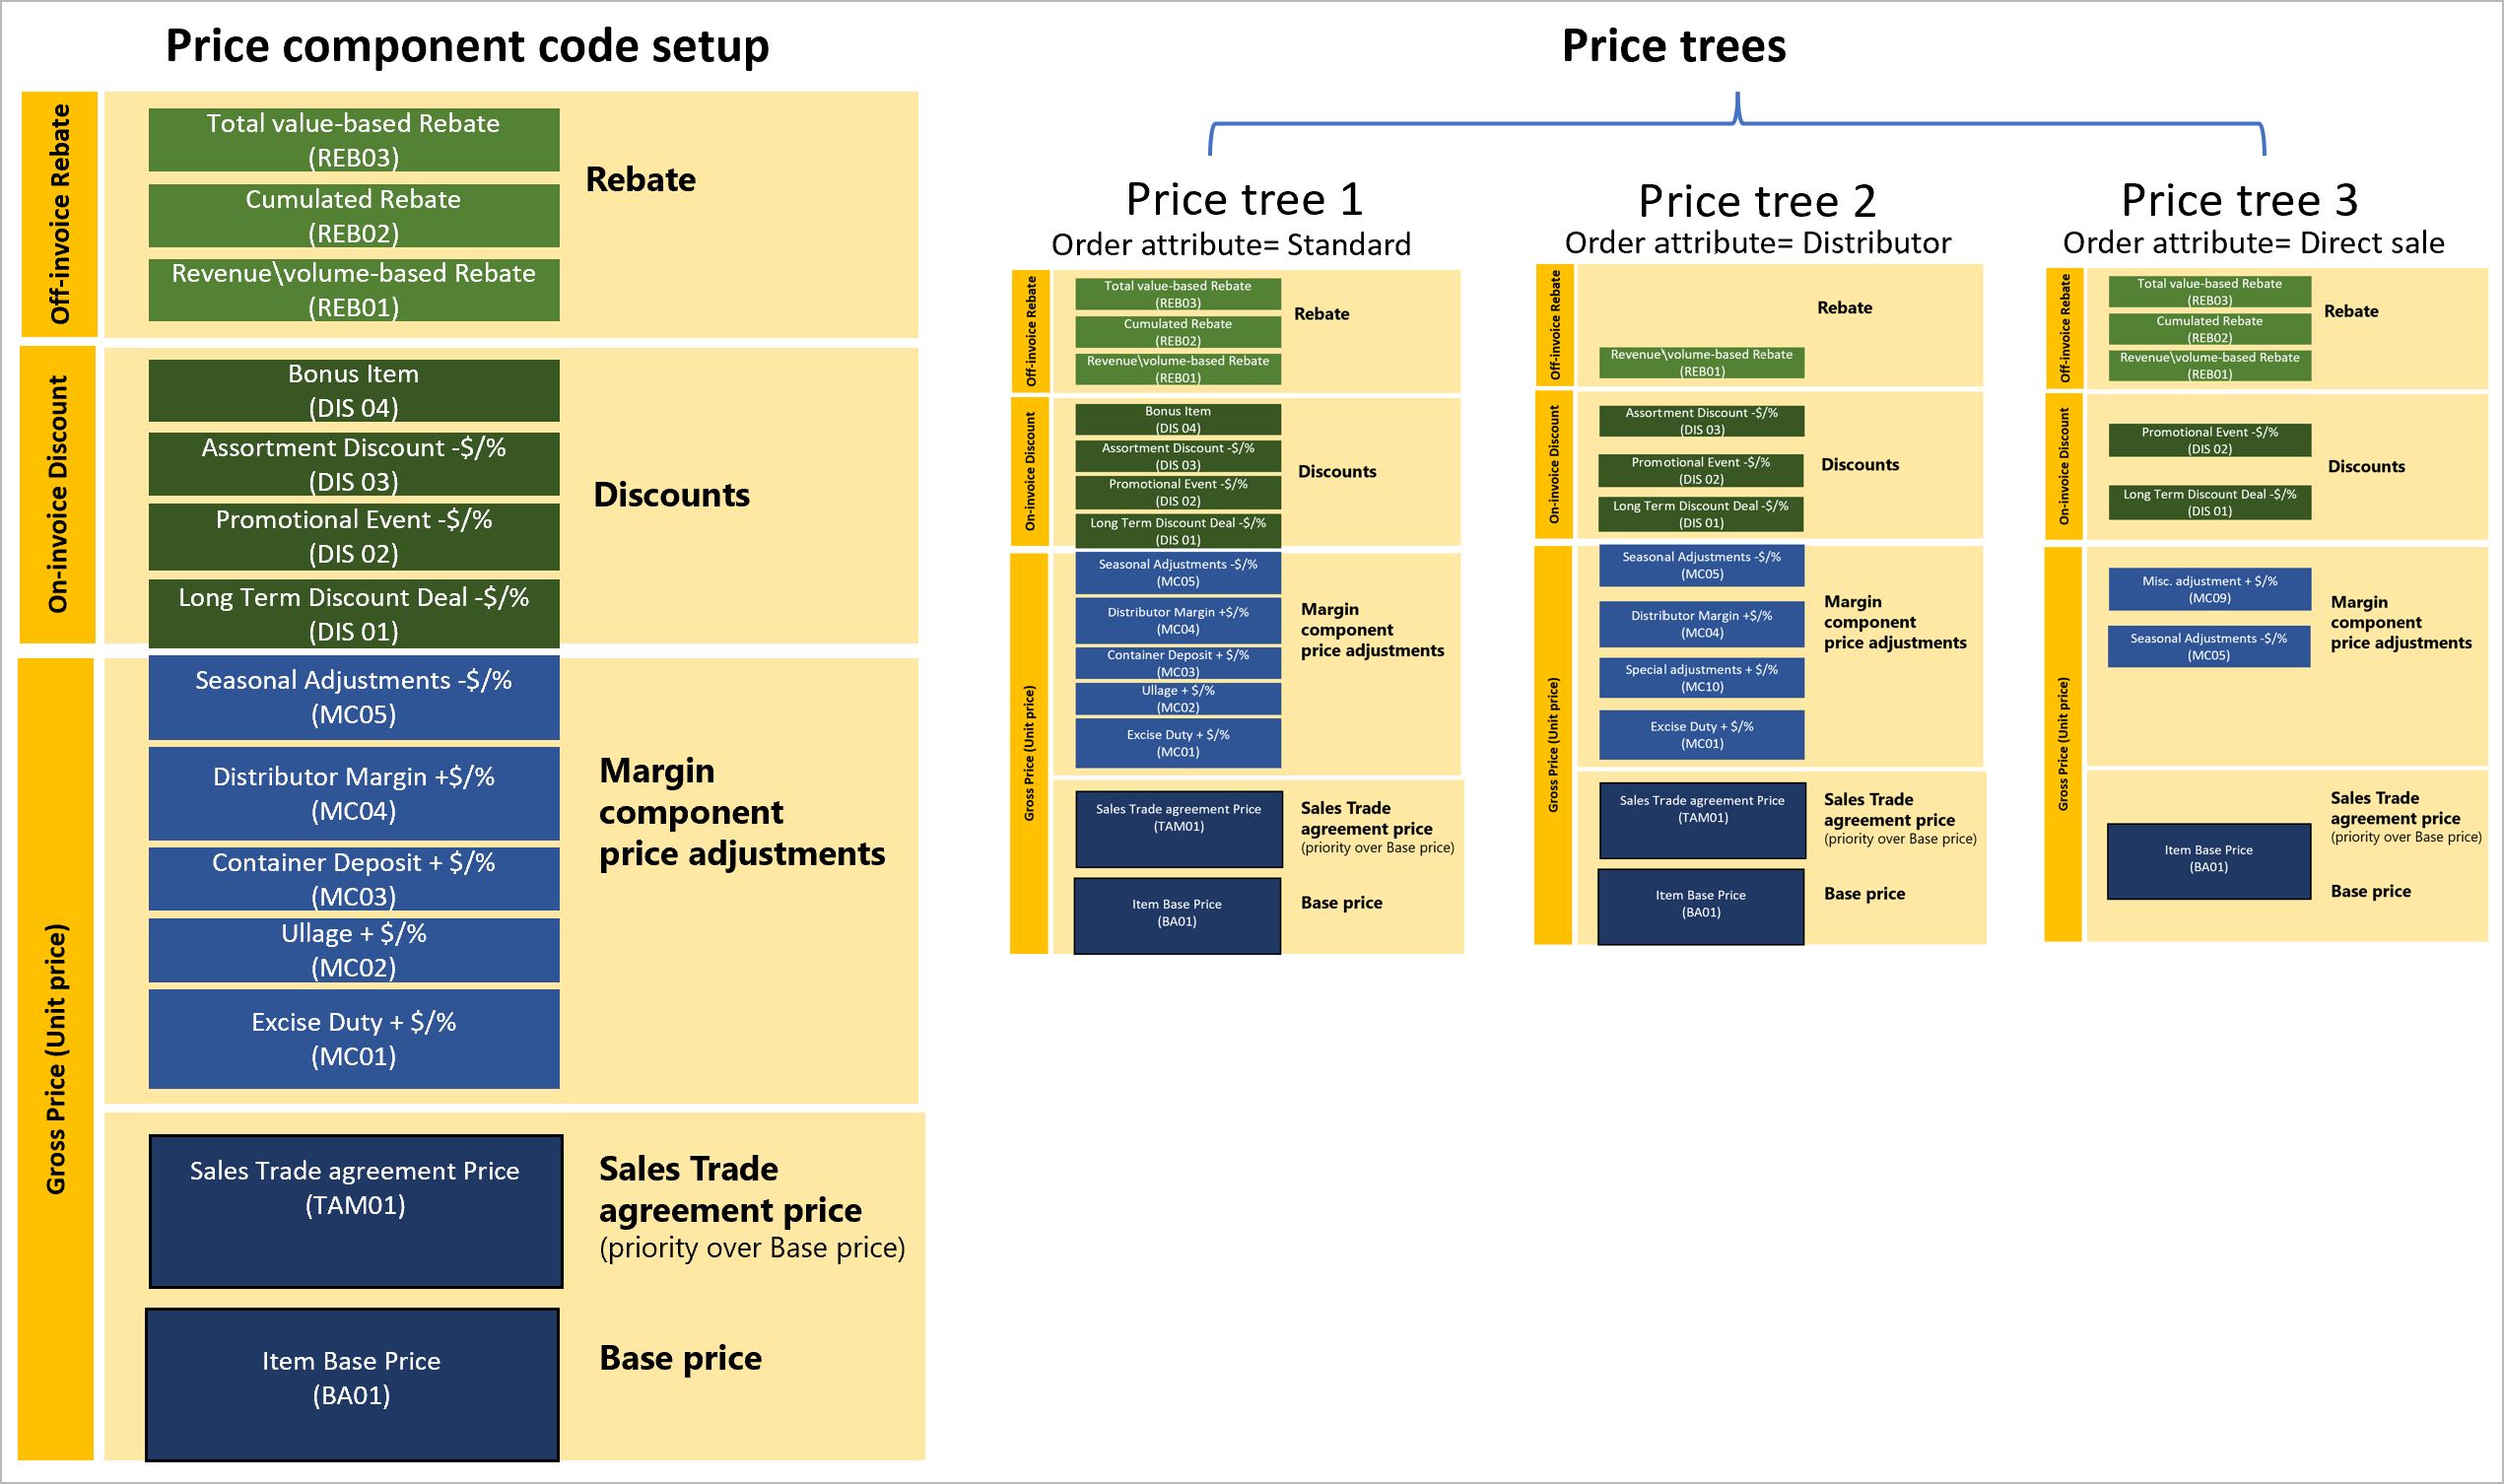 Price tree and price component code setup elements.